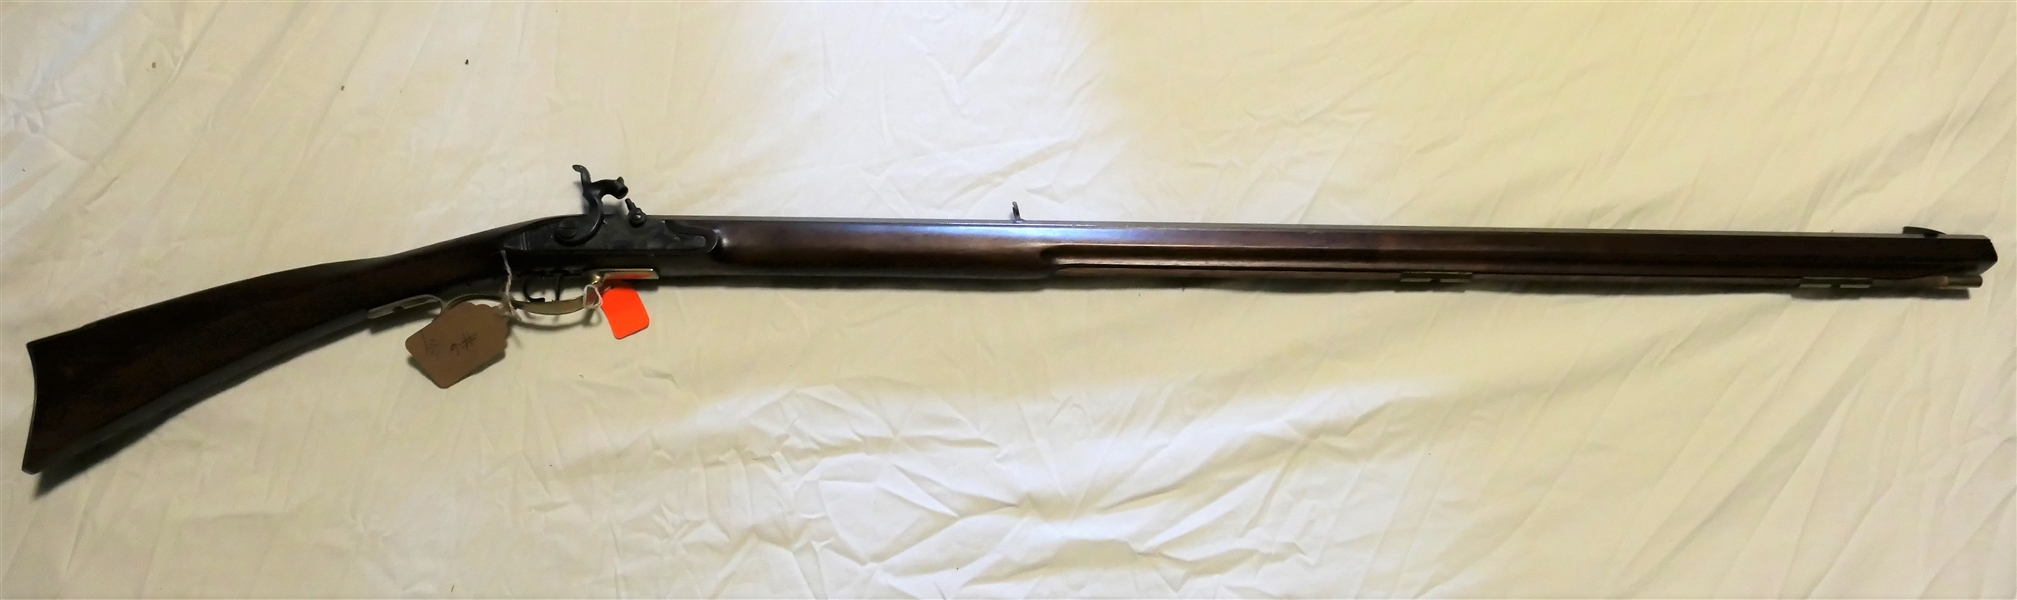 Made in Italy Pedersoli .50 Caliber Black Powder Long Rifle - with Ram Rod